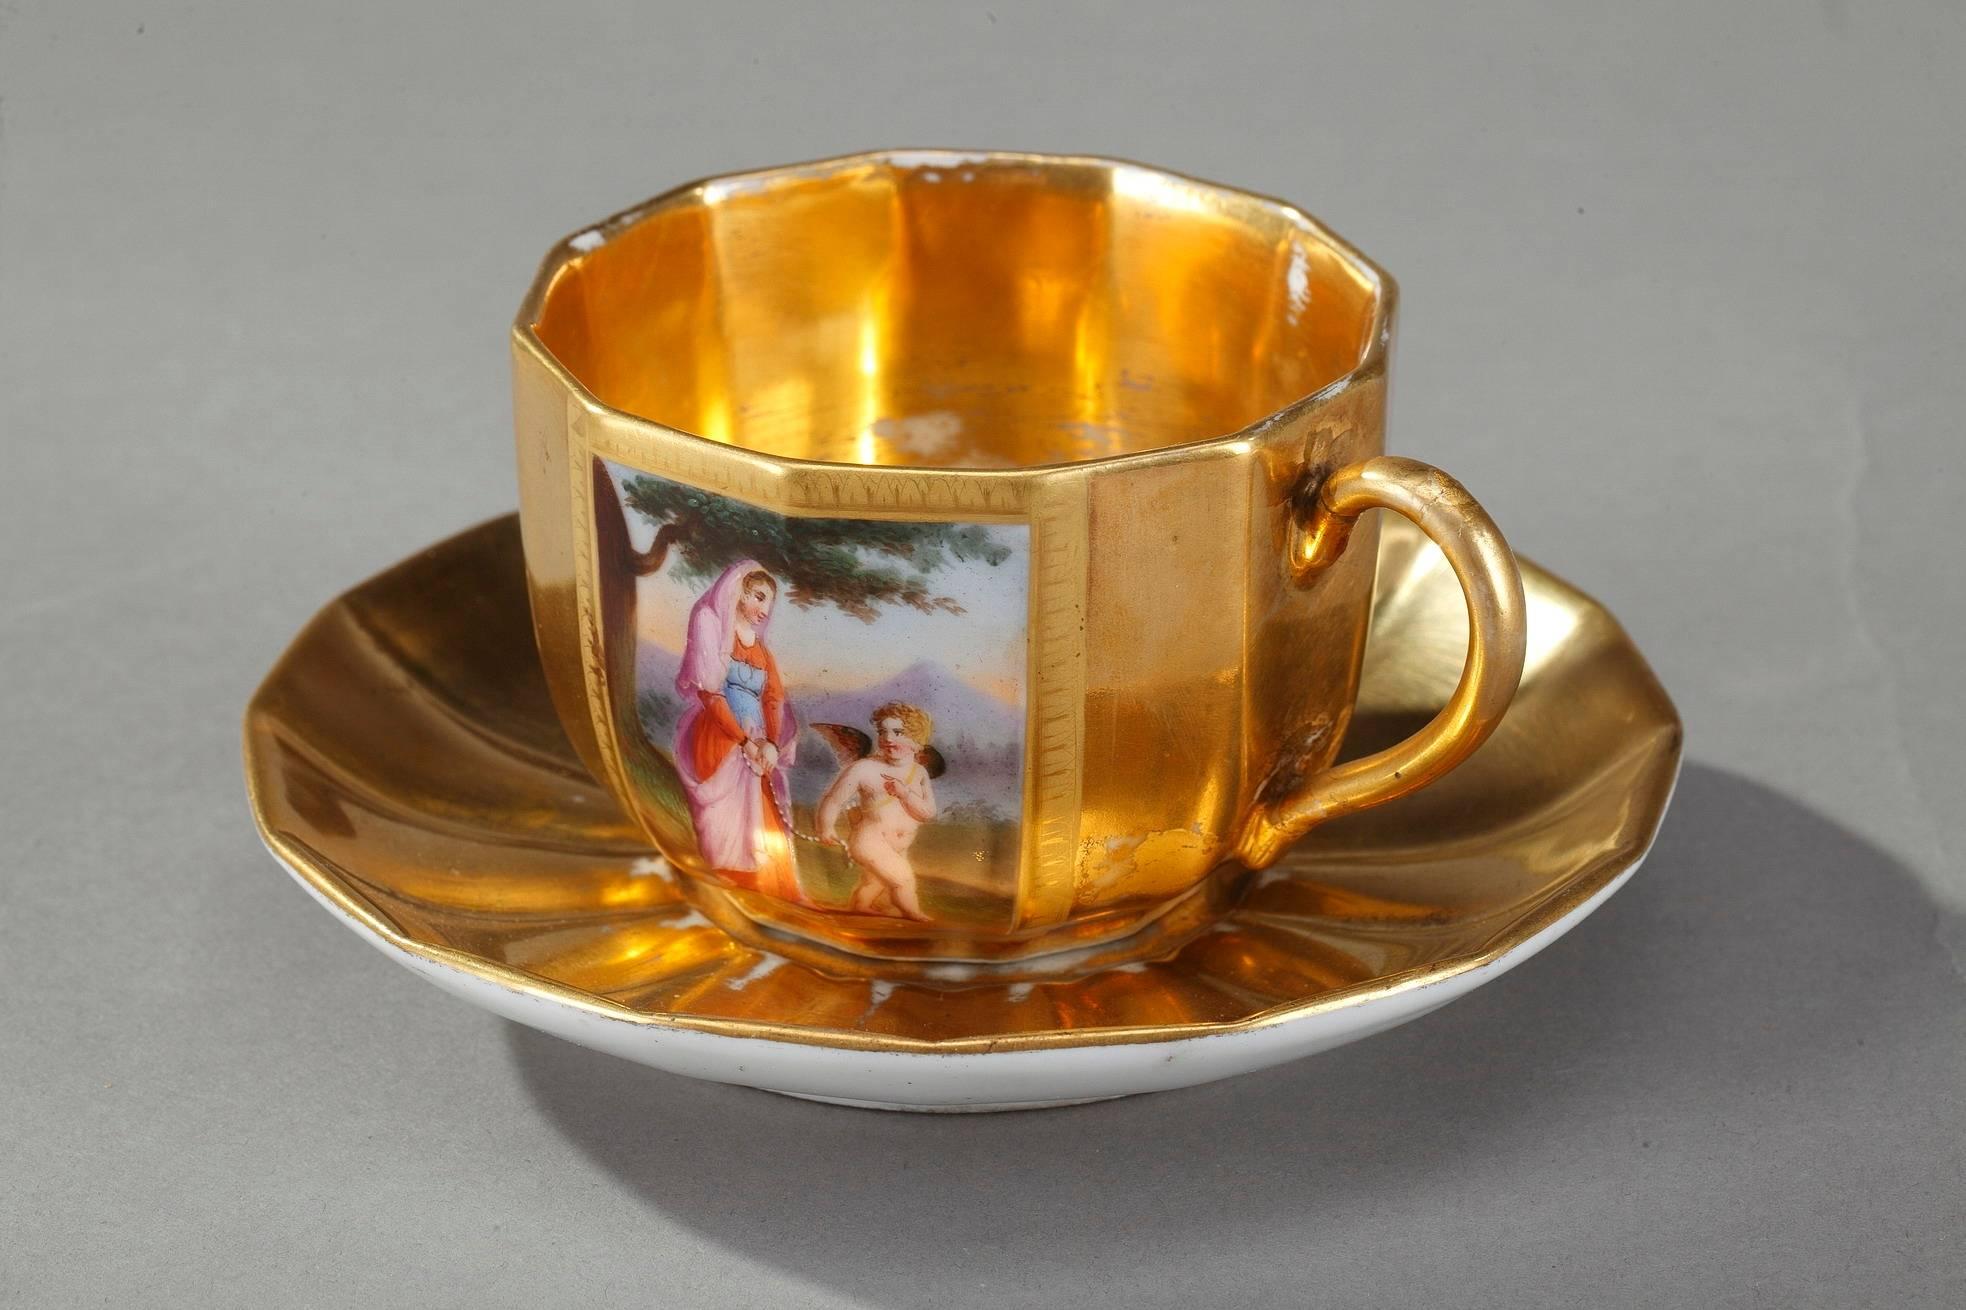 Empire Porcelain Coffee Service with Mythological Scenes 8